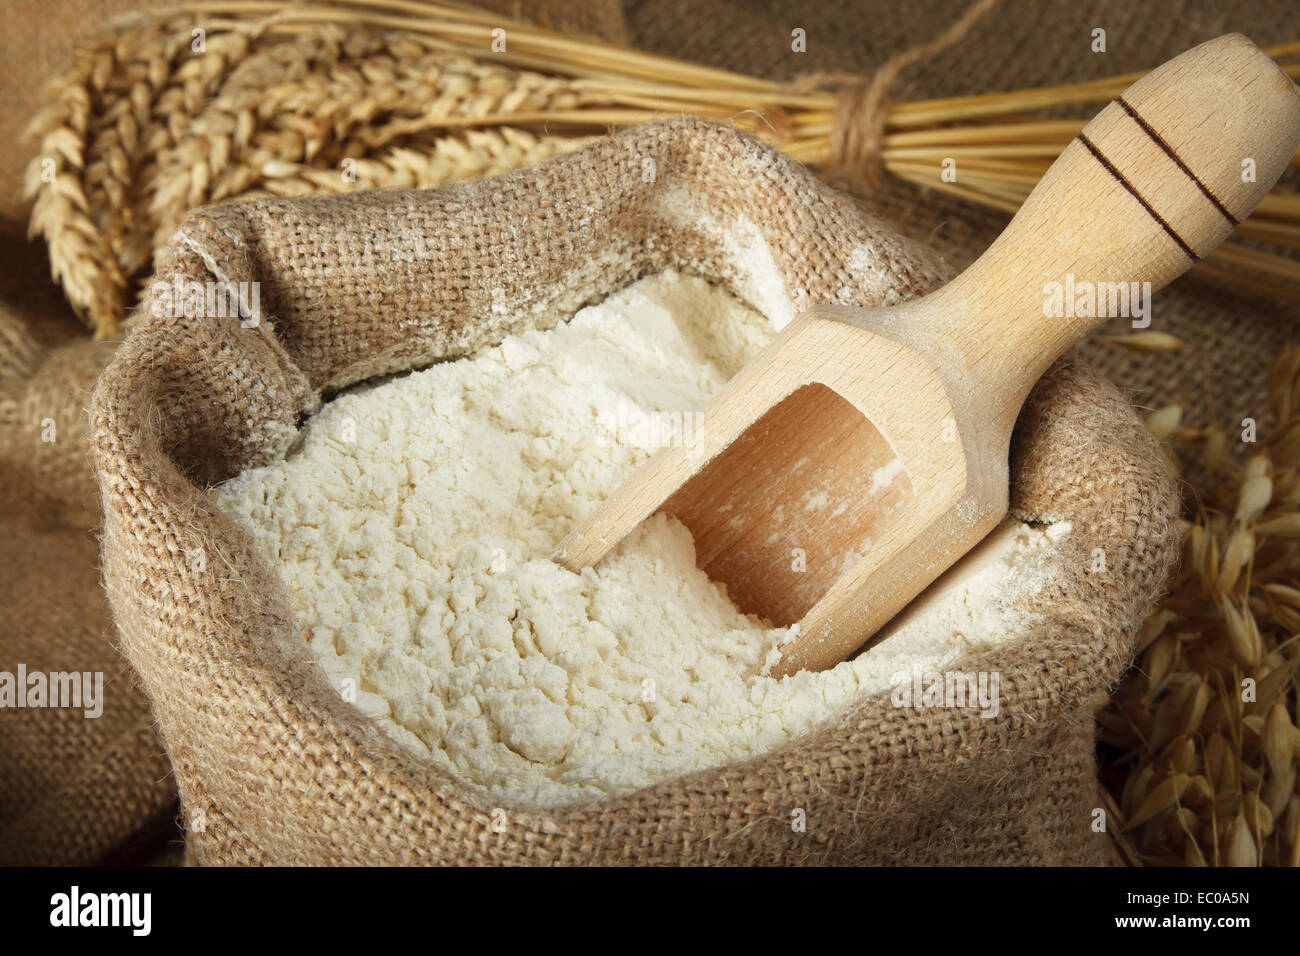 Flour in burlap bag and wooden spoon Stock Photo